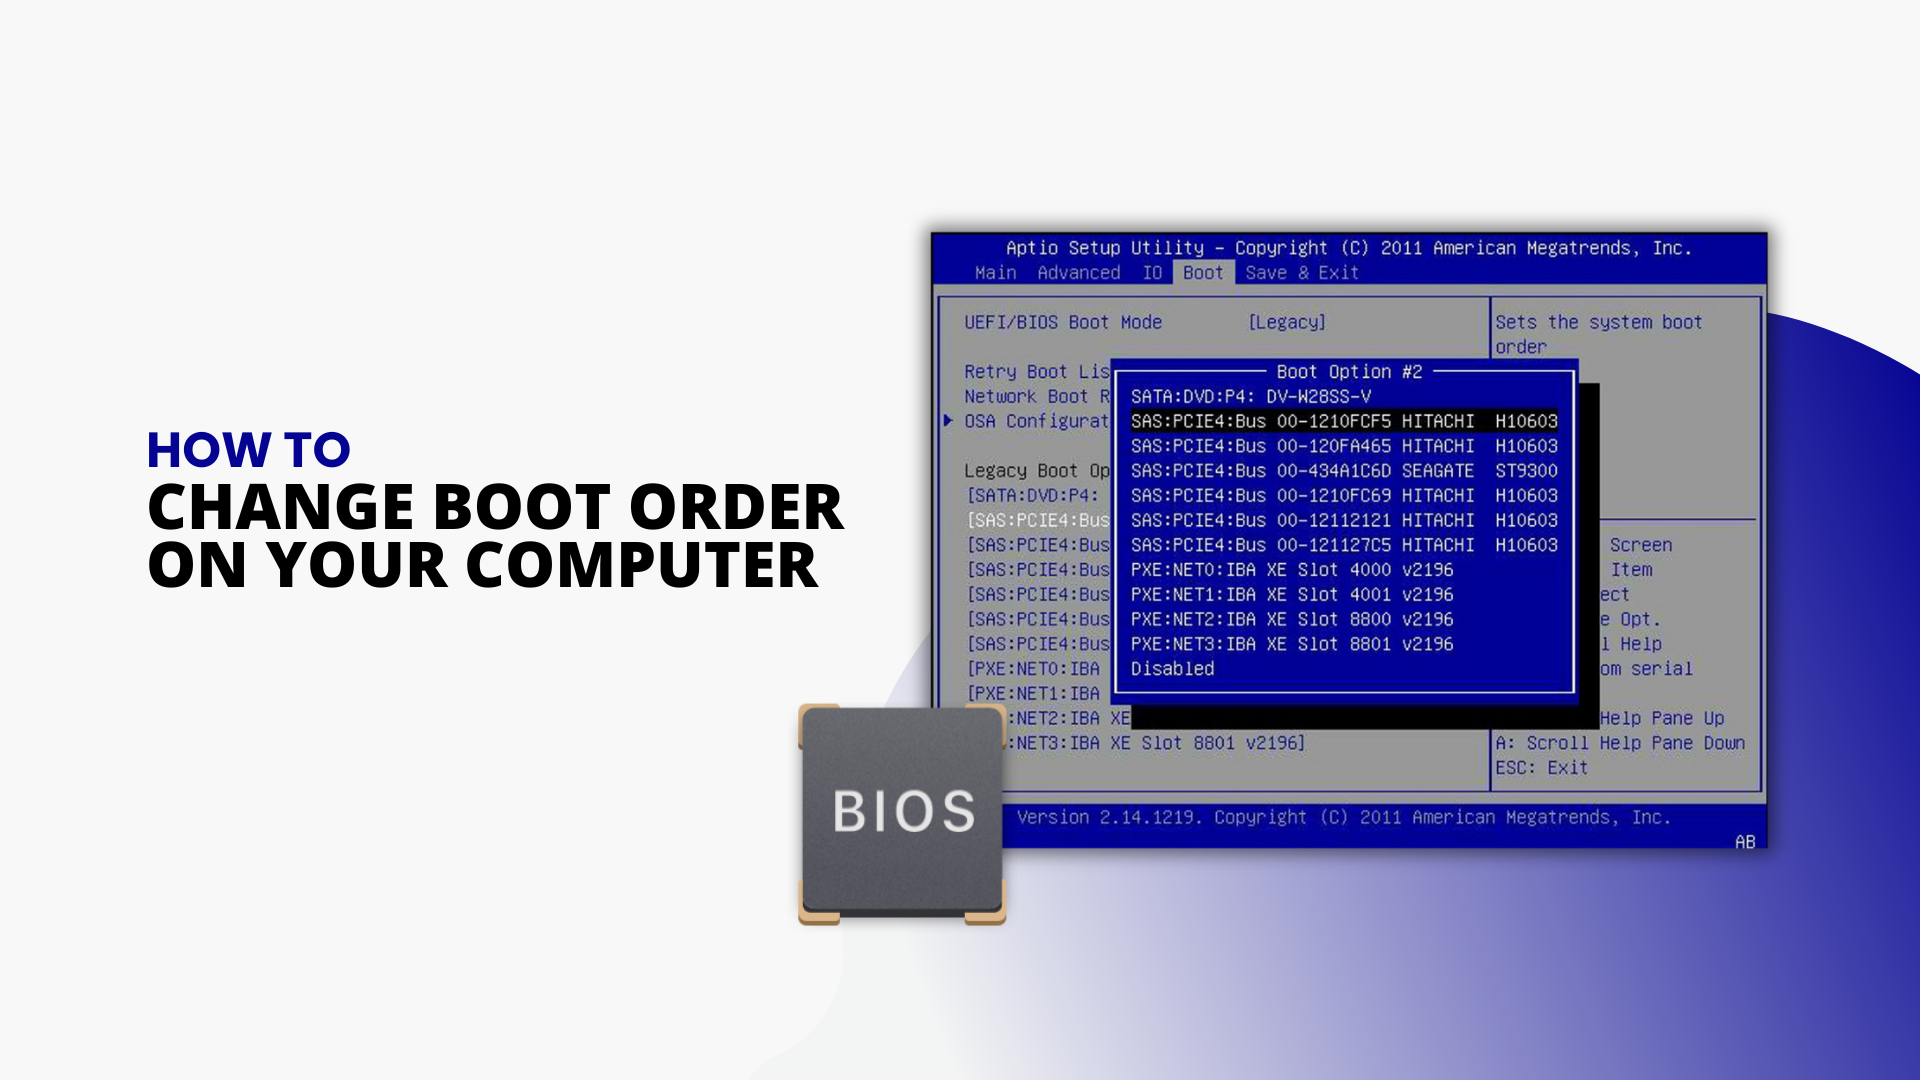 How to Change Your Computer’s Boot Order